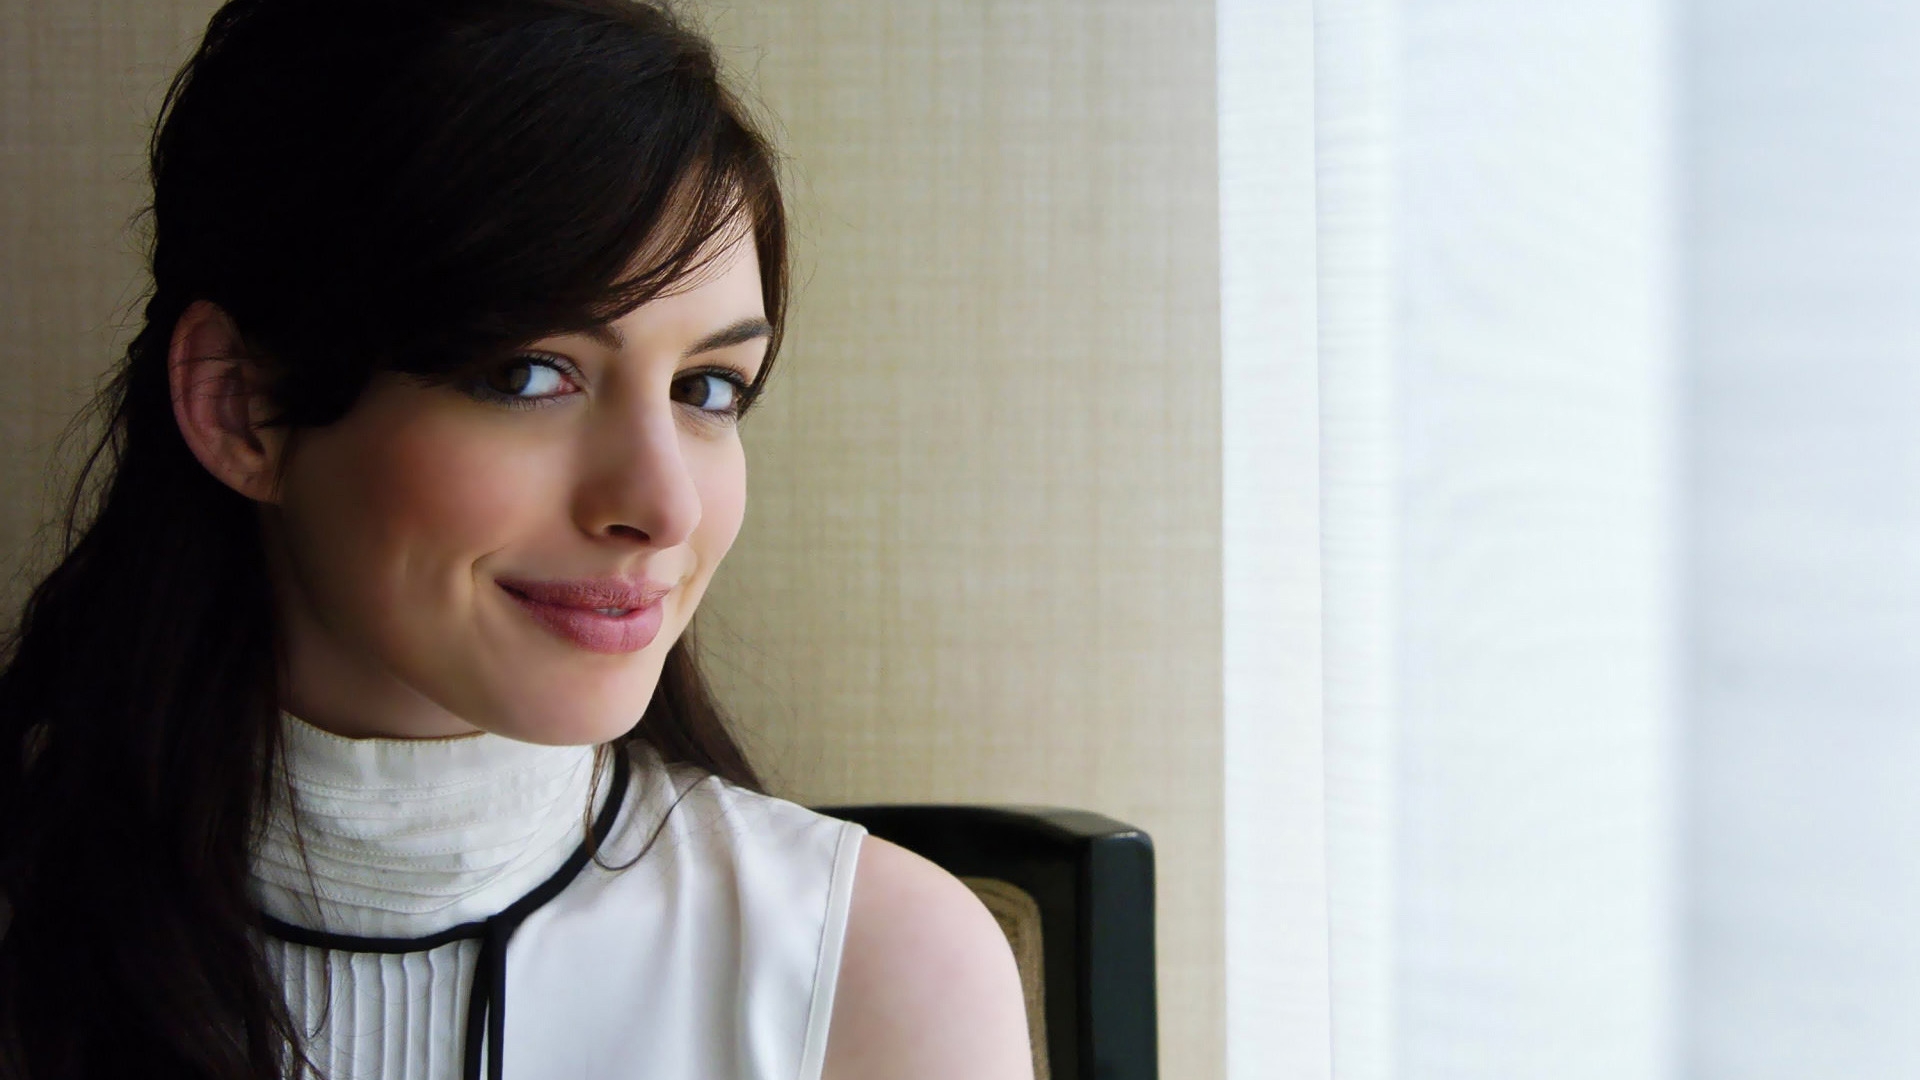 Anne Hathaway Cute for 1920 x 1080 HDTV 1080p resolution